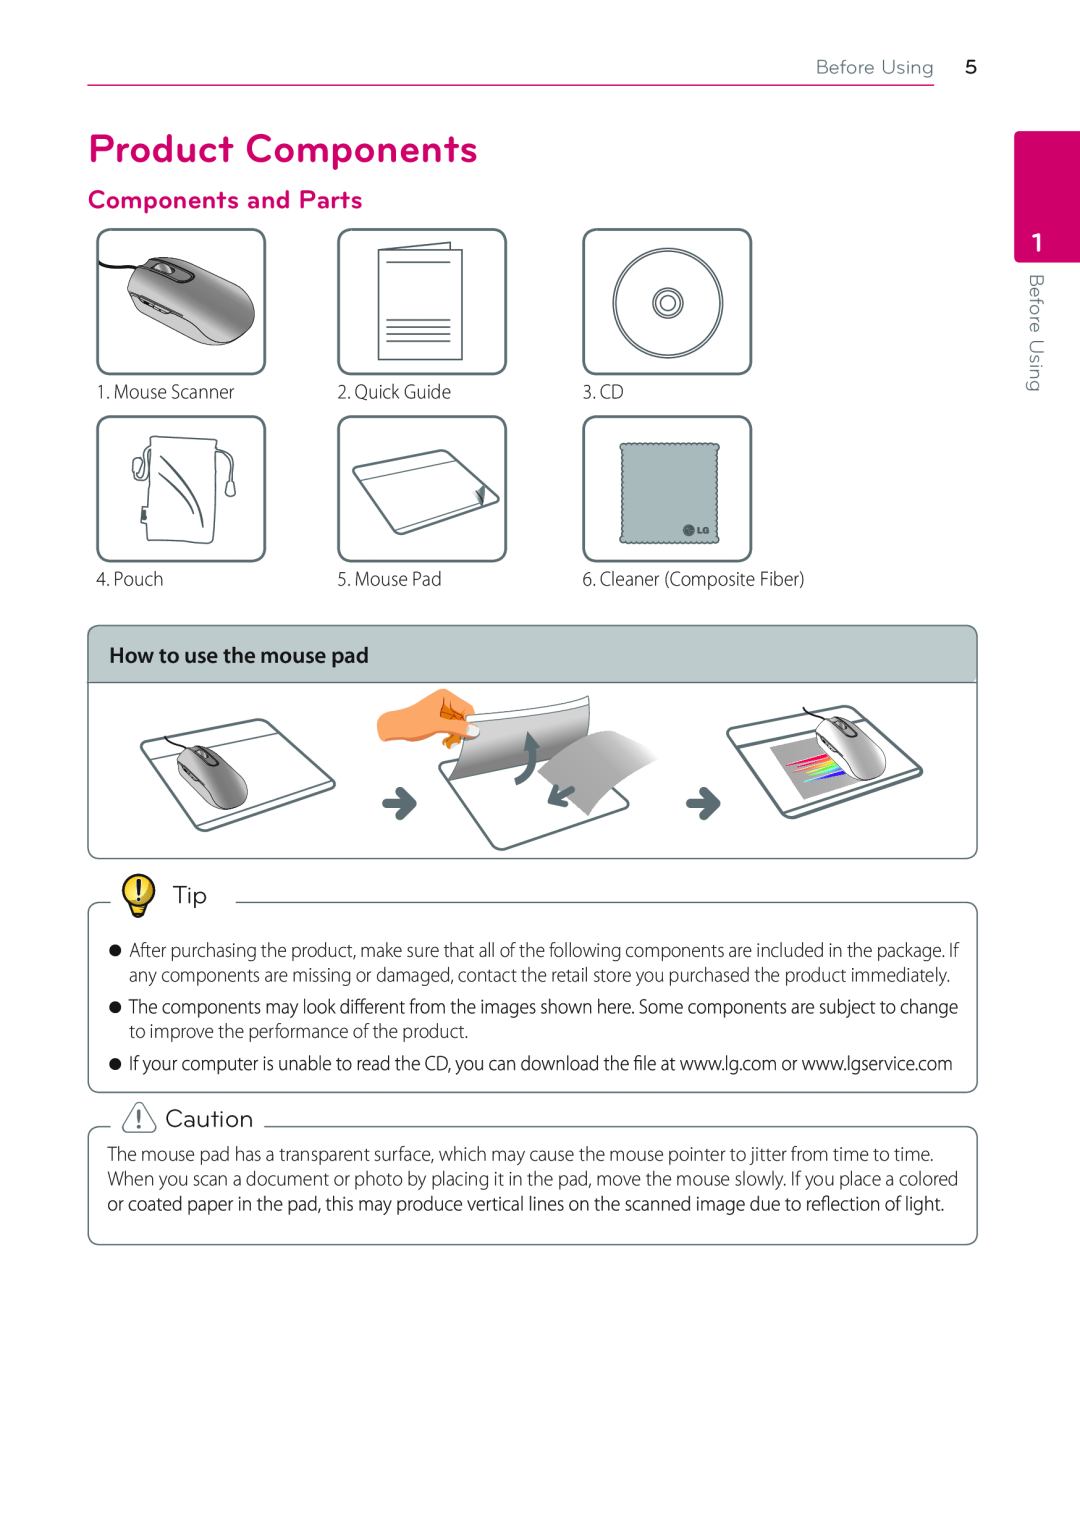 LG Electronics LSM-100 owner manual Product Components, Components and Parts, How to use the mouse pad, Before Using 